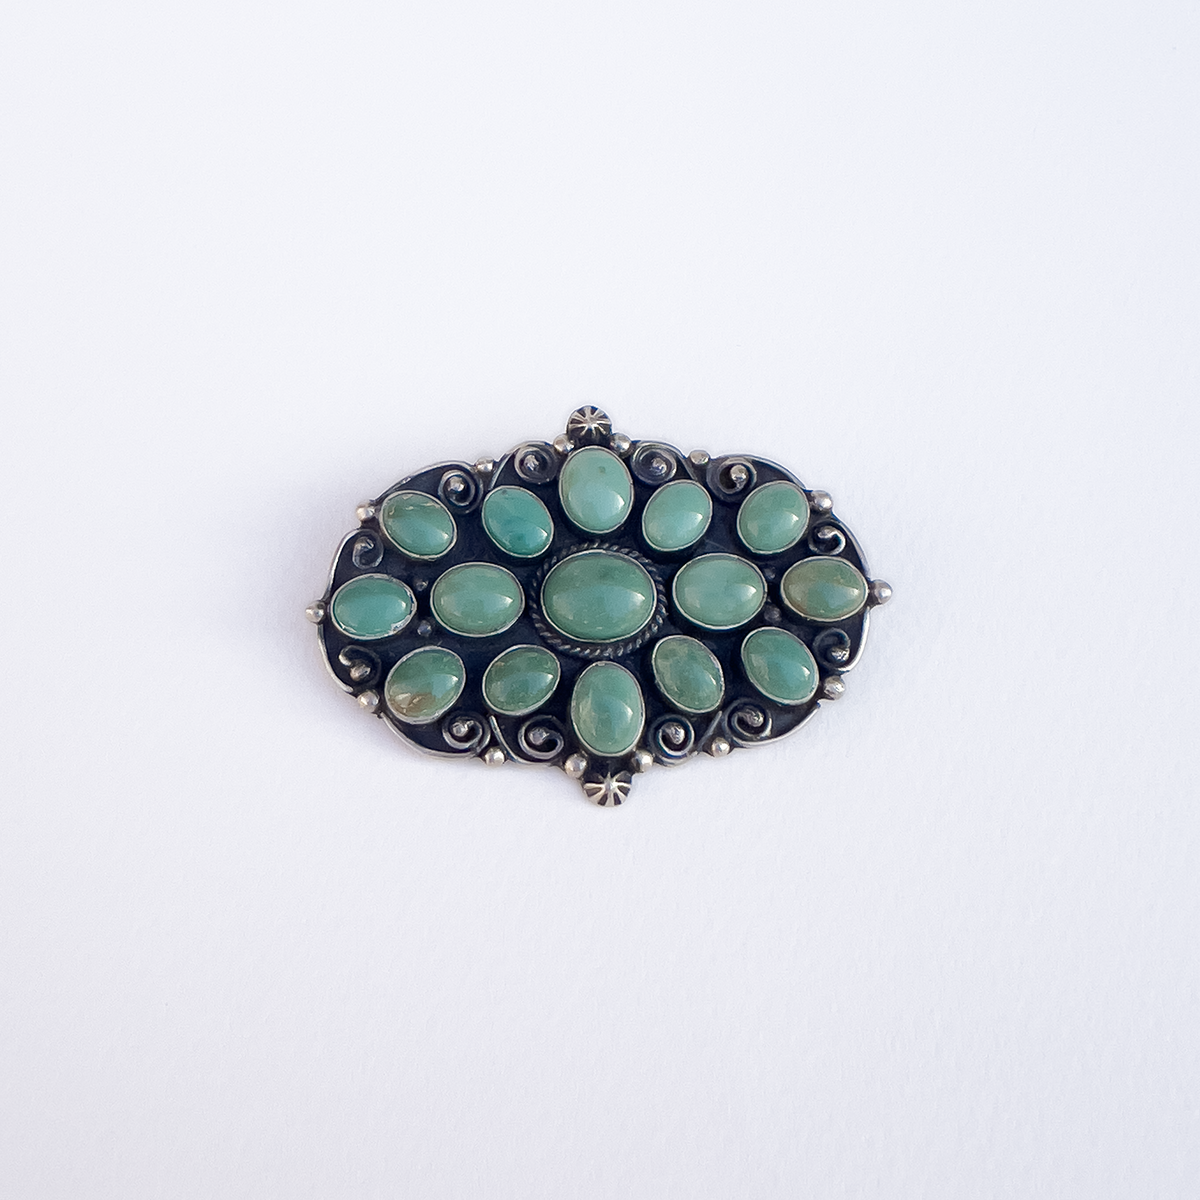 Emerald Valley Turquoise Cluster Pin